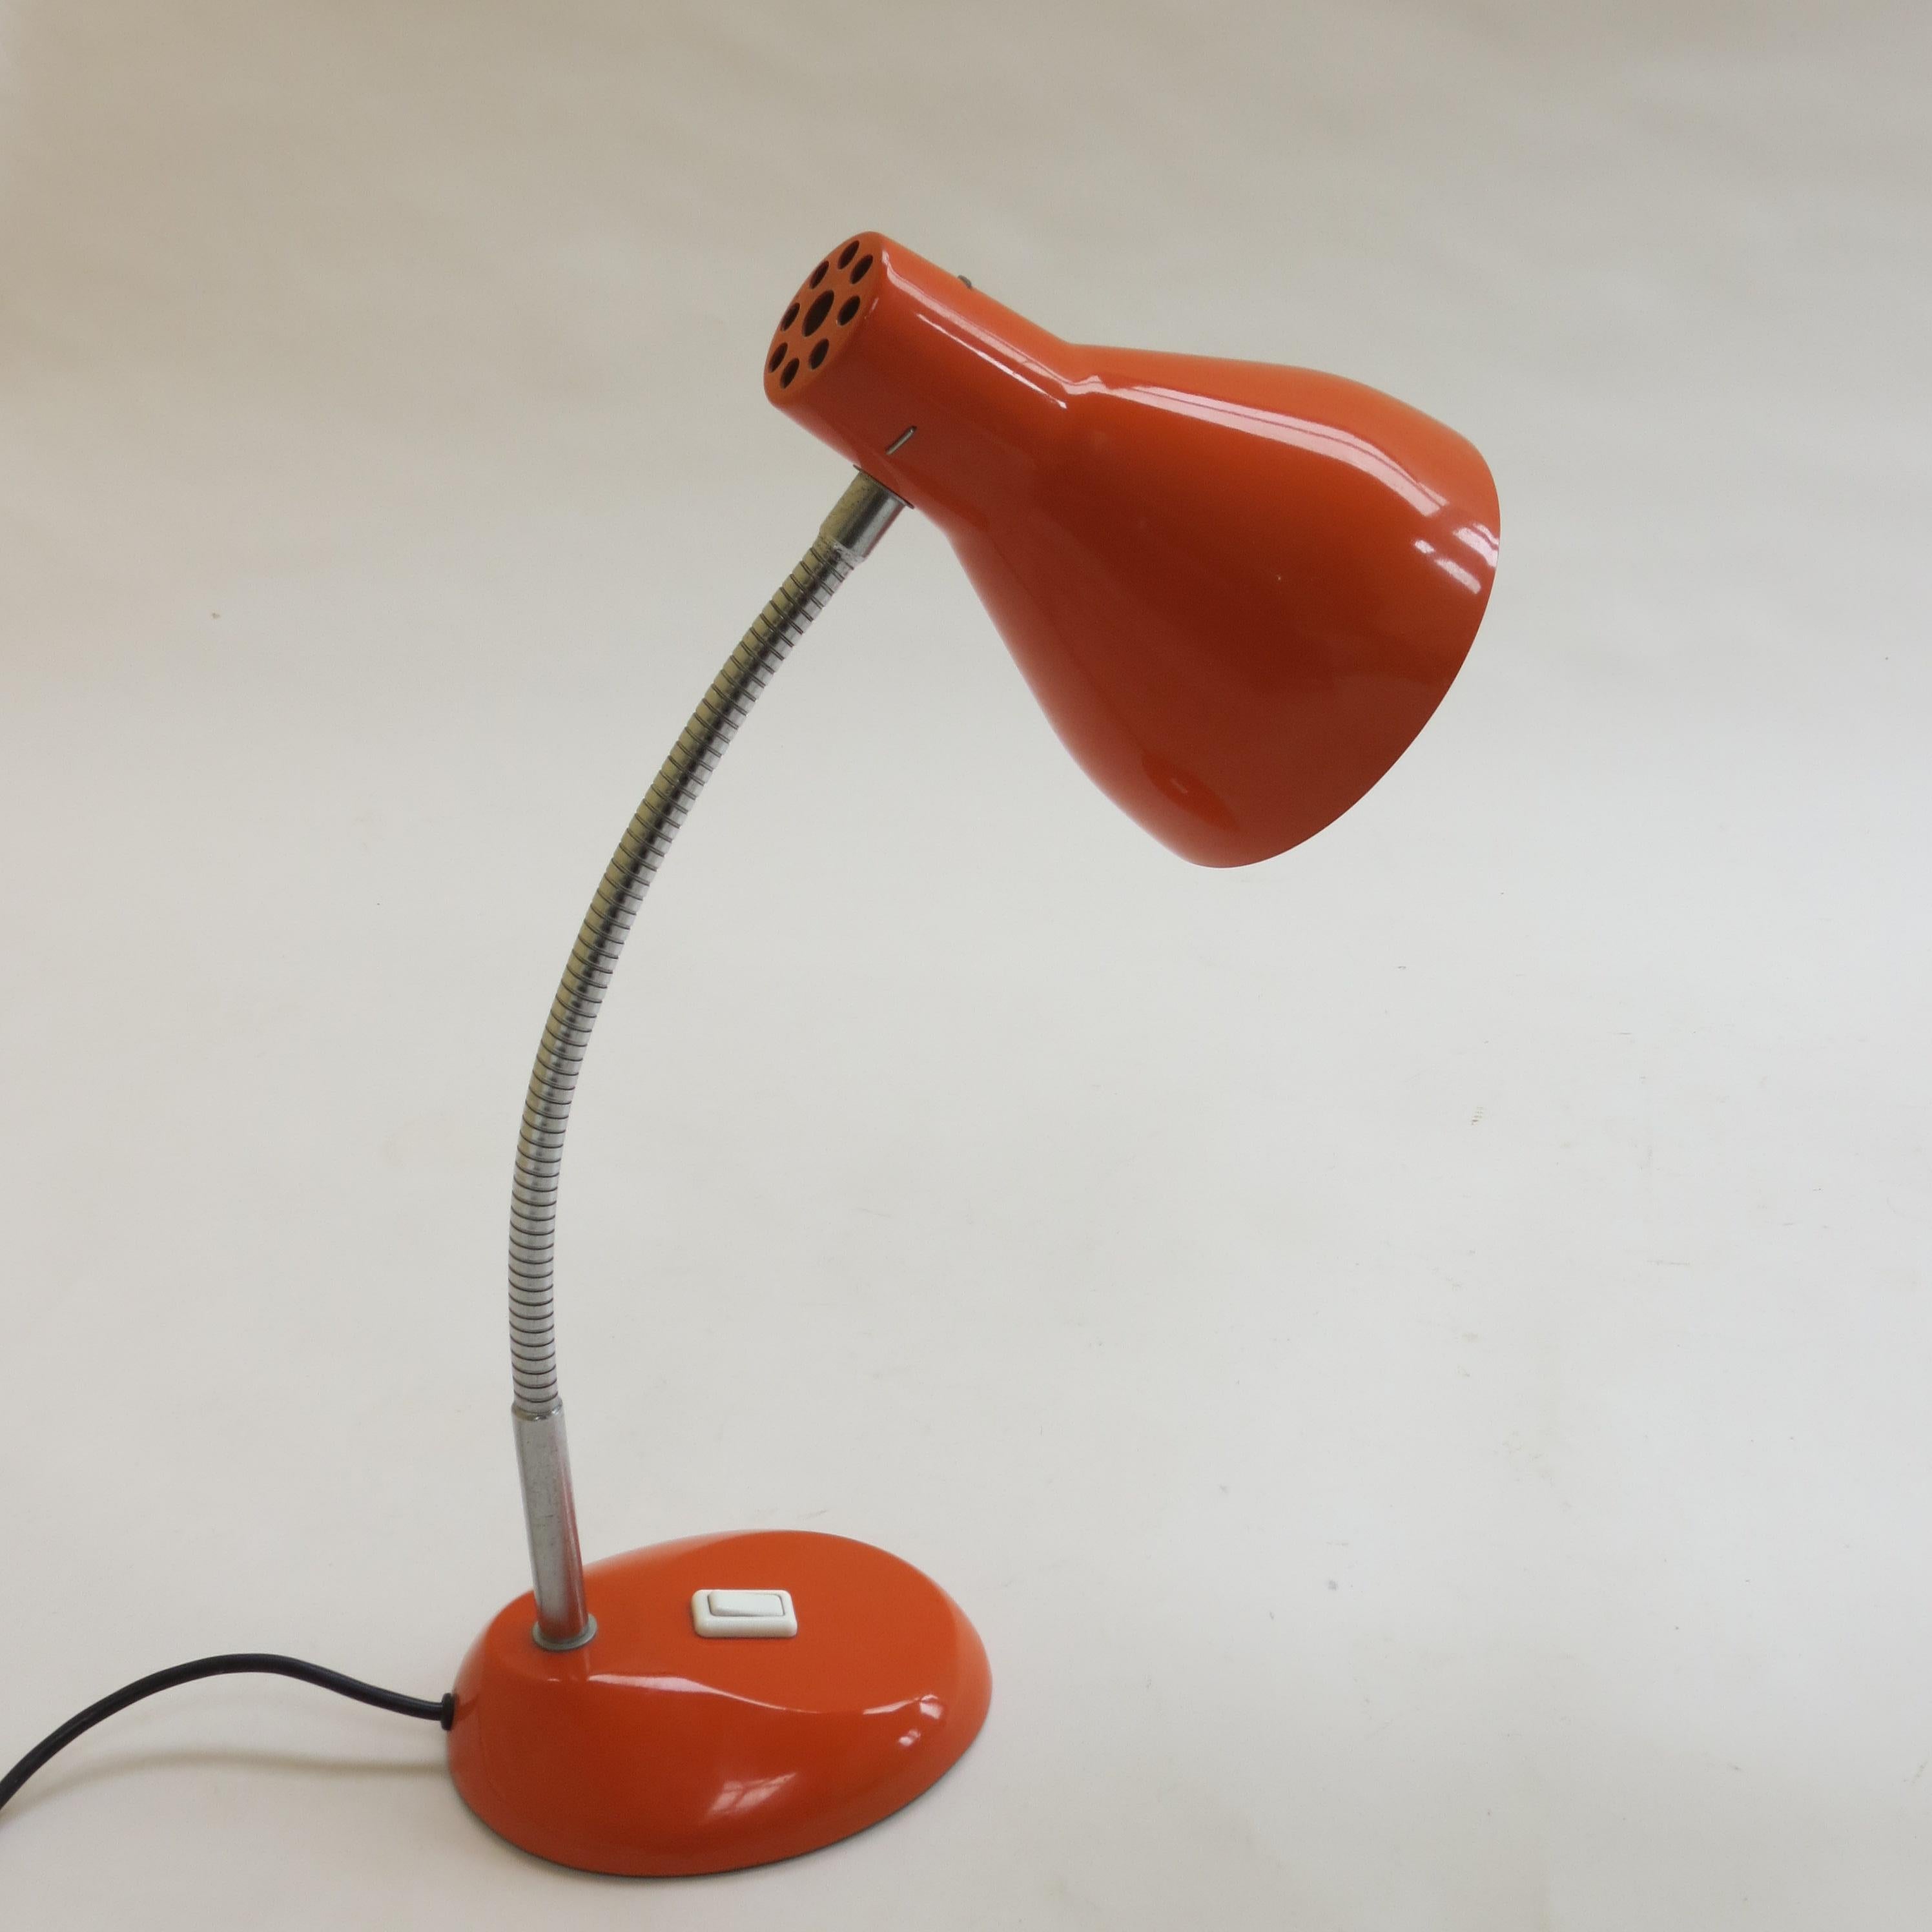 Vintage desk lamp by H Terry and Son. Dates from the 1960s. Orange metal shade and base with flexible neck allowing the lamp to be adjusted to suit. 

Green baize to the underside along with sticker that reads Made in England, H Terry and Son